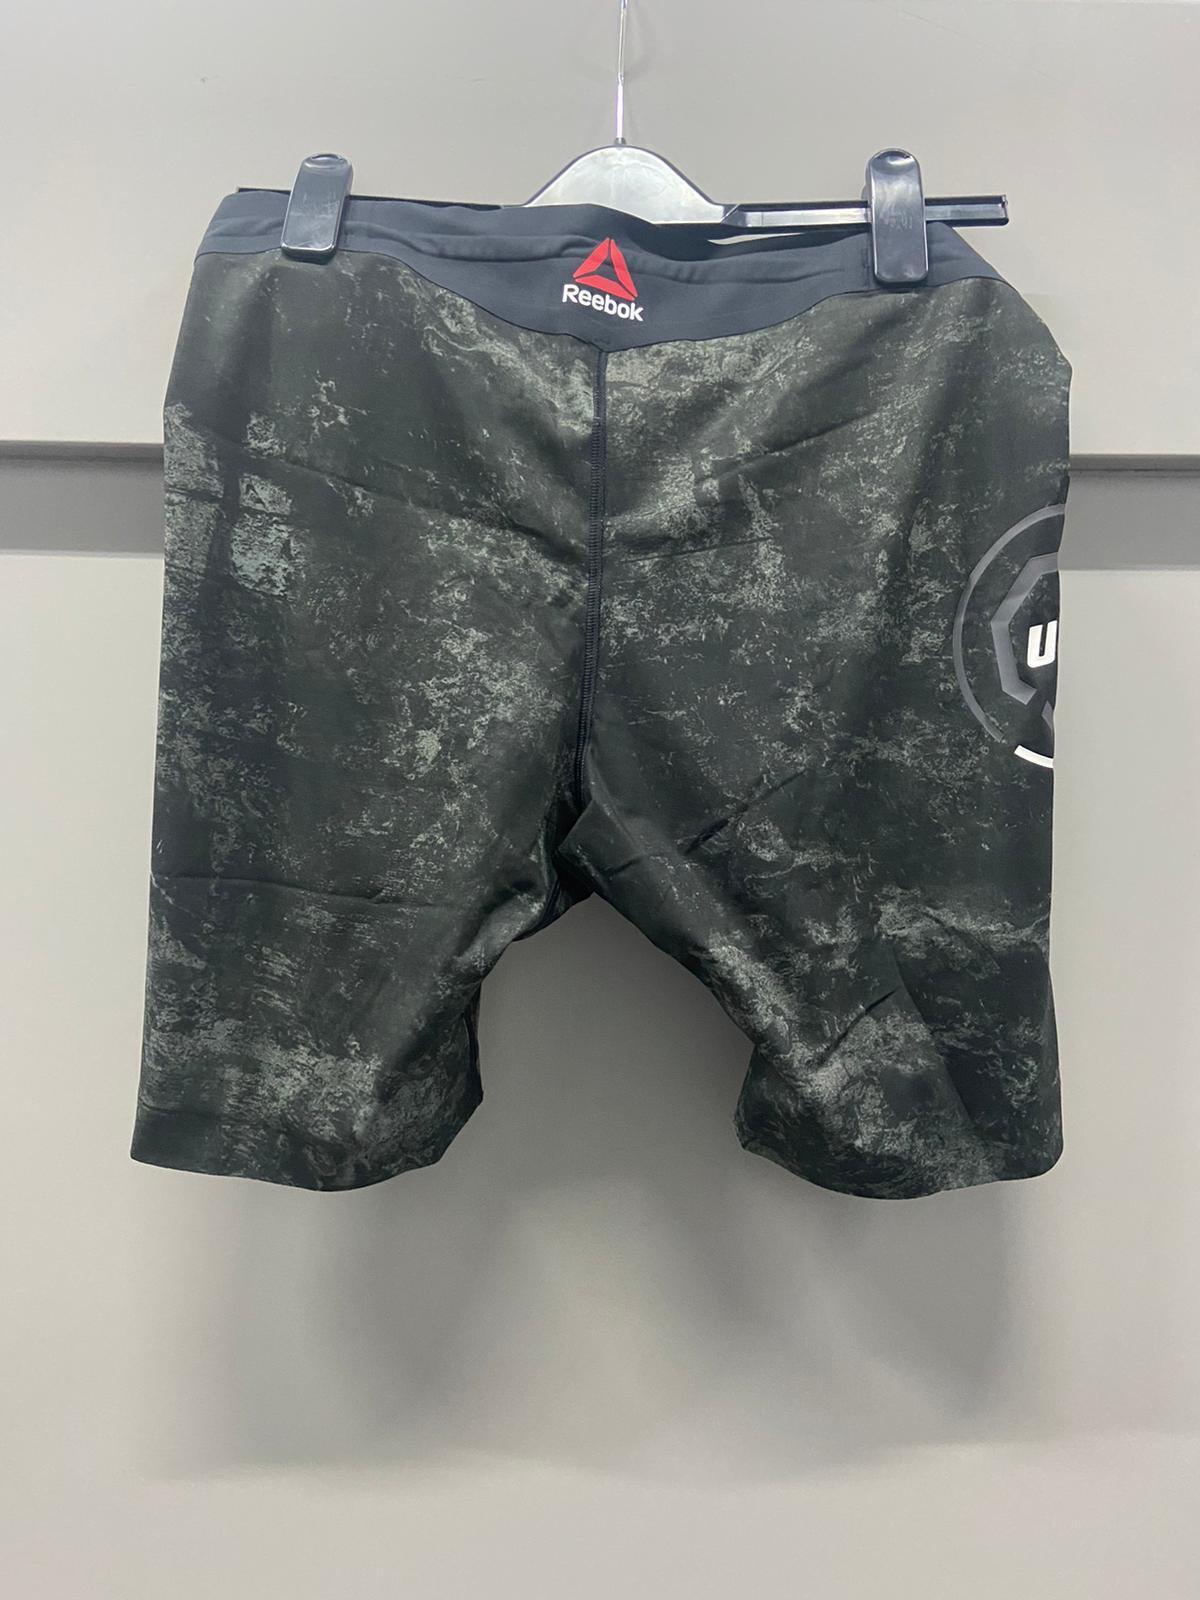 UFC Store on X: Own the Official Reebok UFC Fight Night Octagon Short worn  with pride by all UFC fighters on Fight Night.  #UFC  #UFCStore  / X